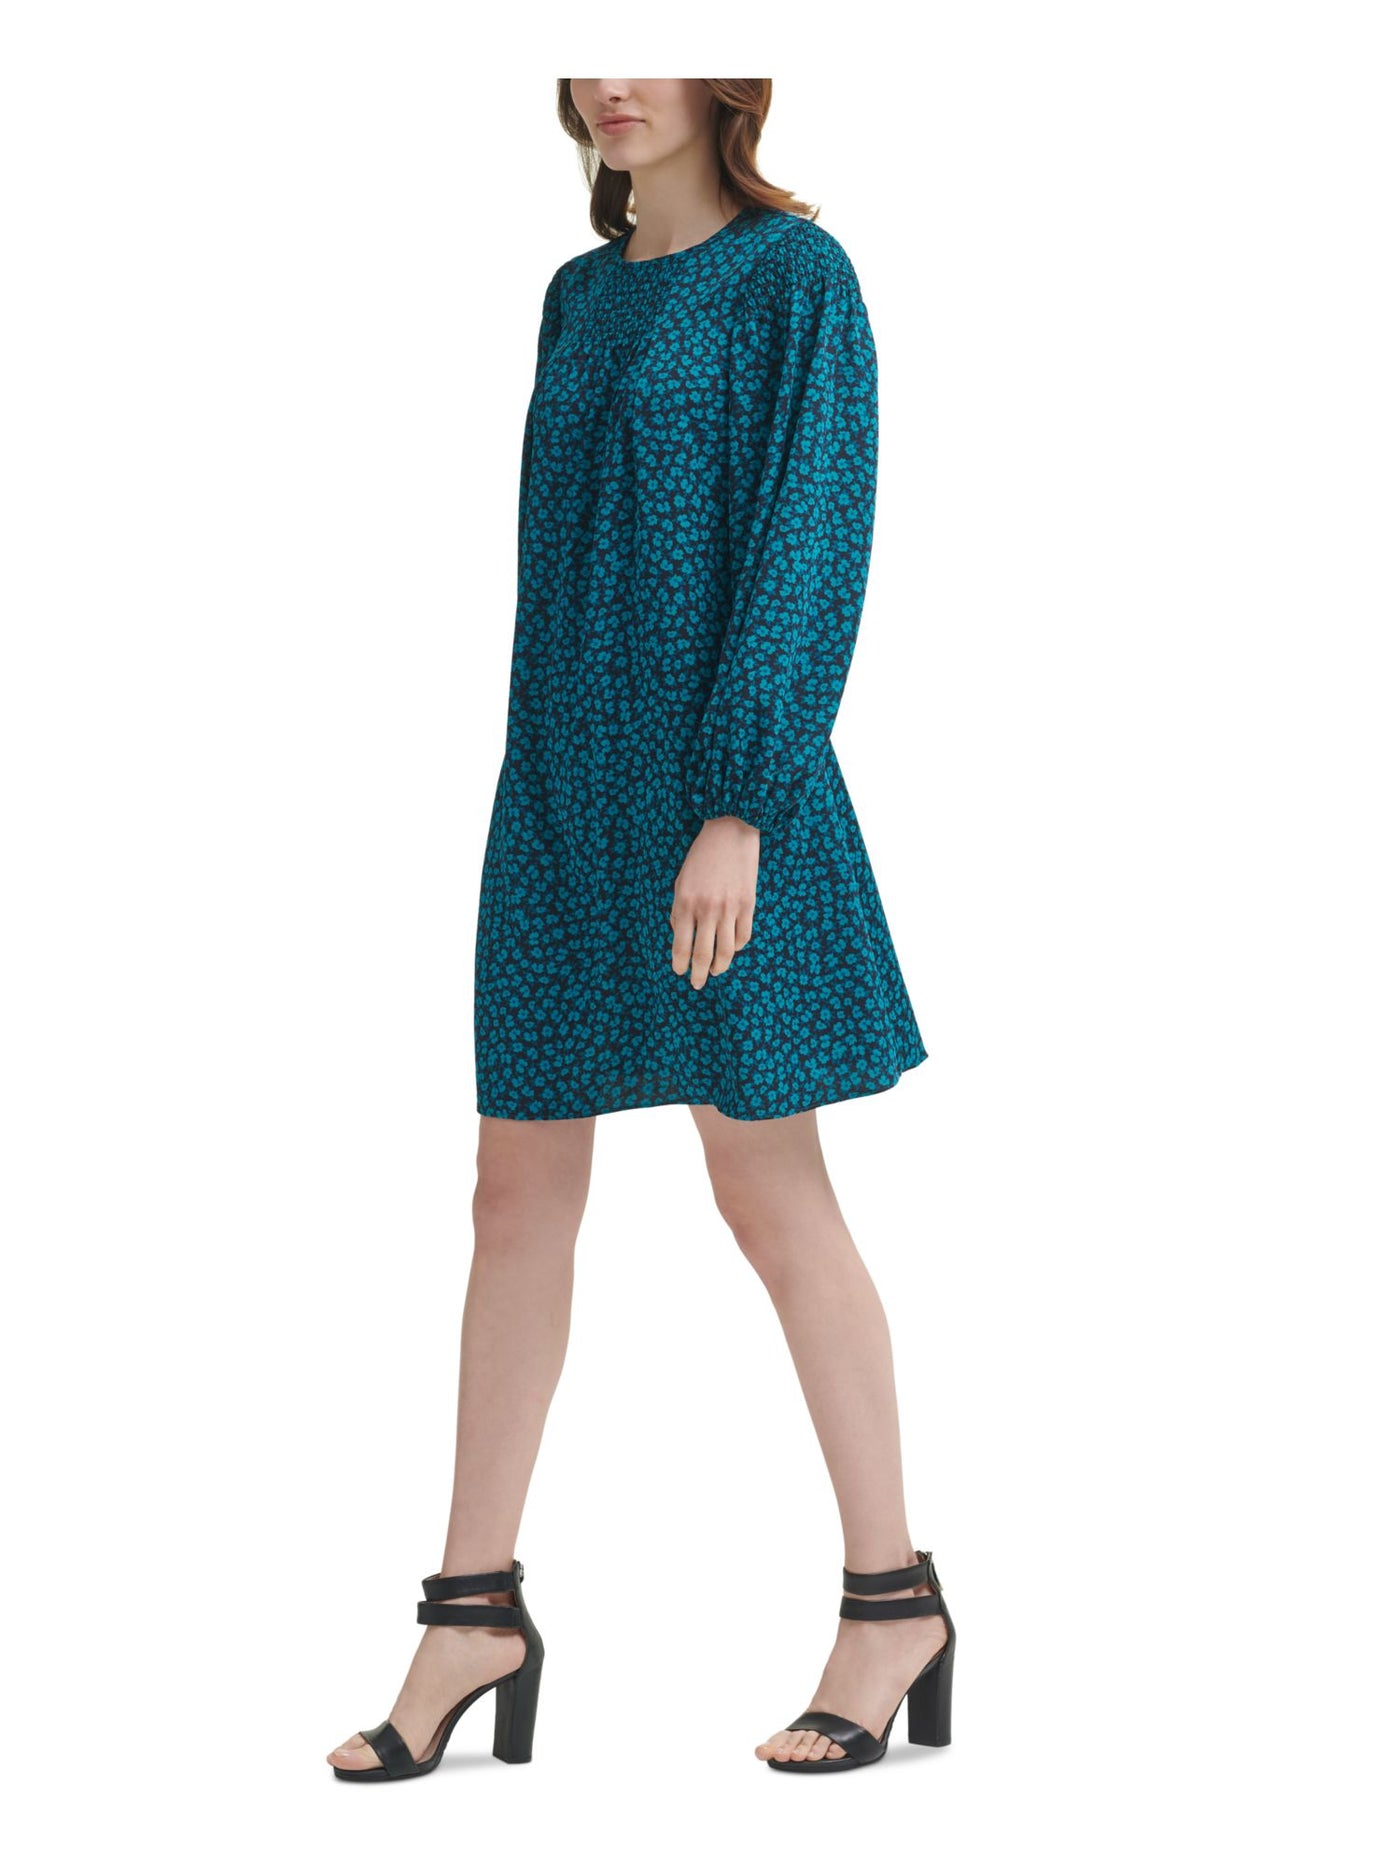 DKNY Womens Teal Smocked Floral Long Sleeve Round Neck Short Evening Shift Dress 12